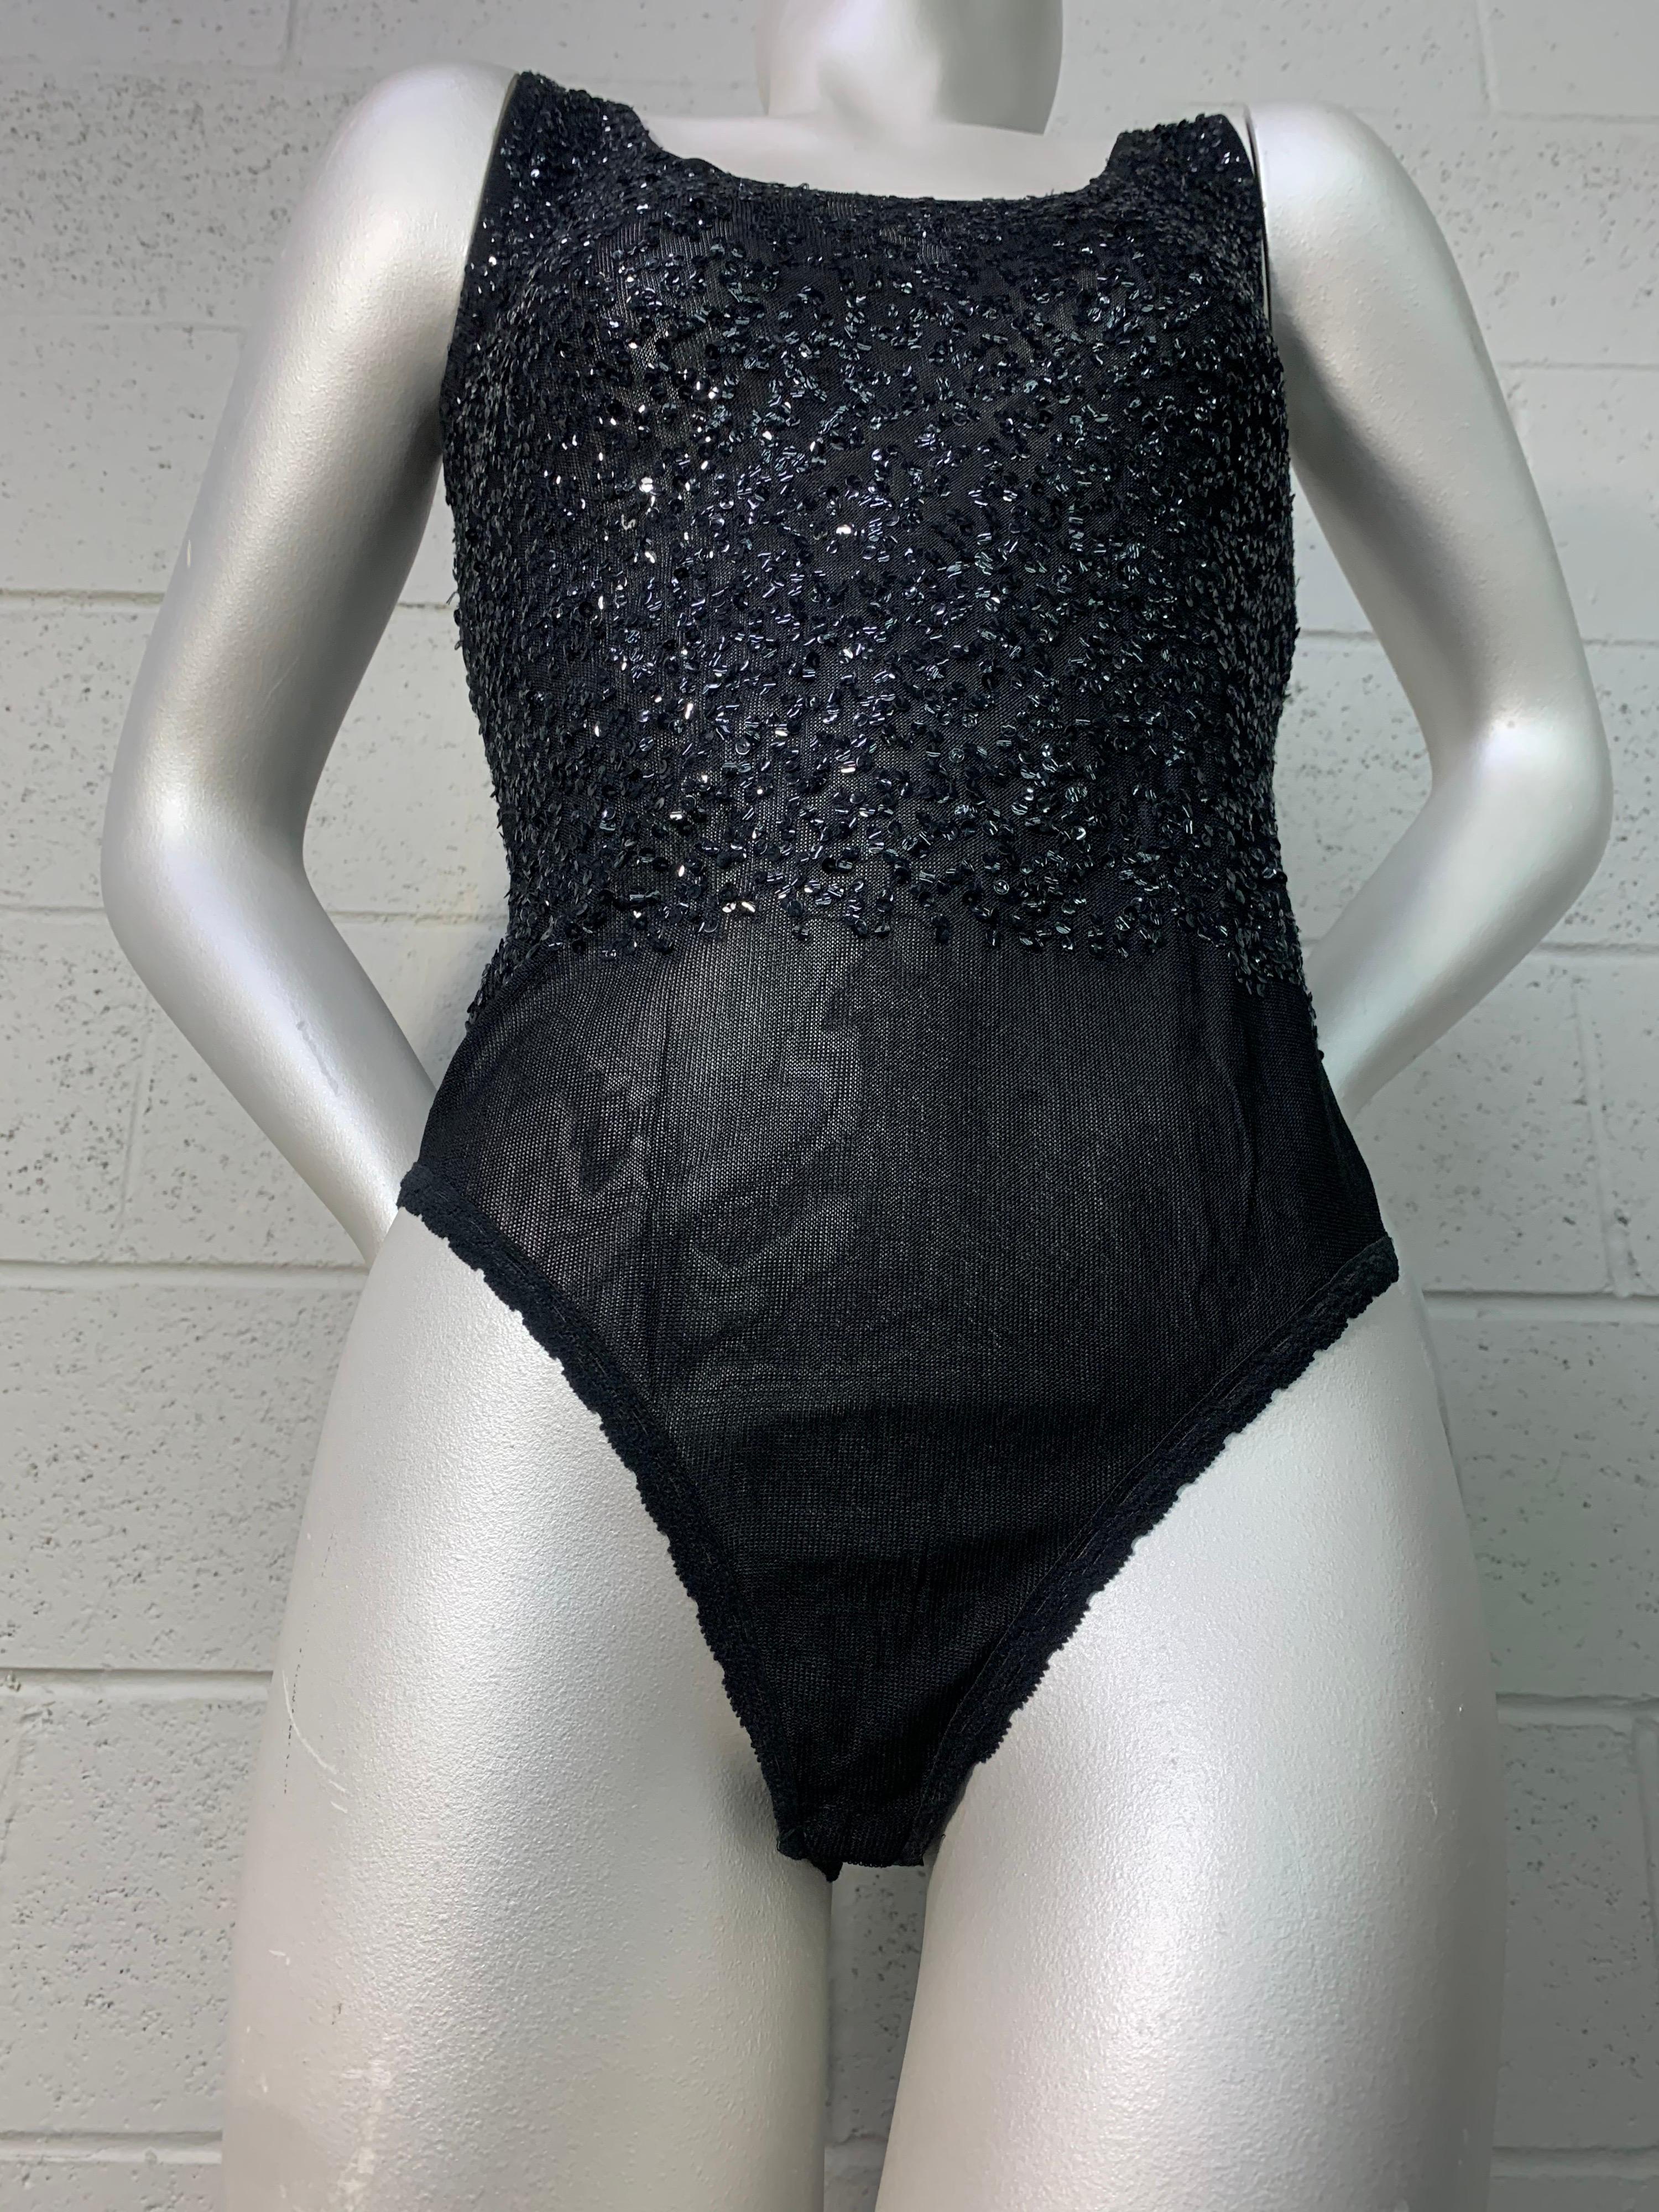 A sexy 1990s Donna Karan sheer black bodysuit with applied black sequin work on entire bodice. Get your Glamazon on! Snap crotch closure. Size Medium.